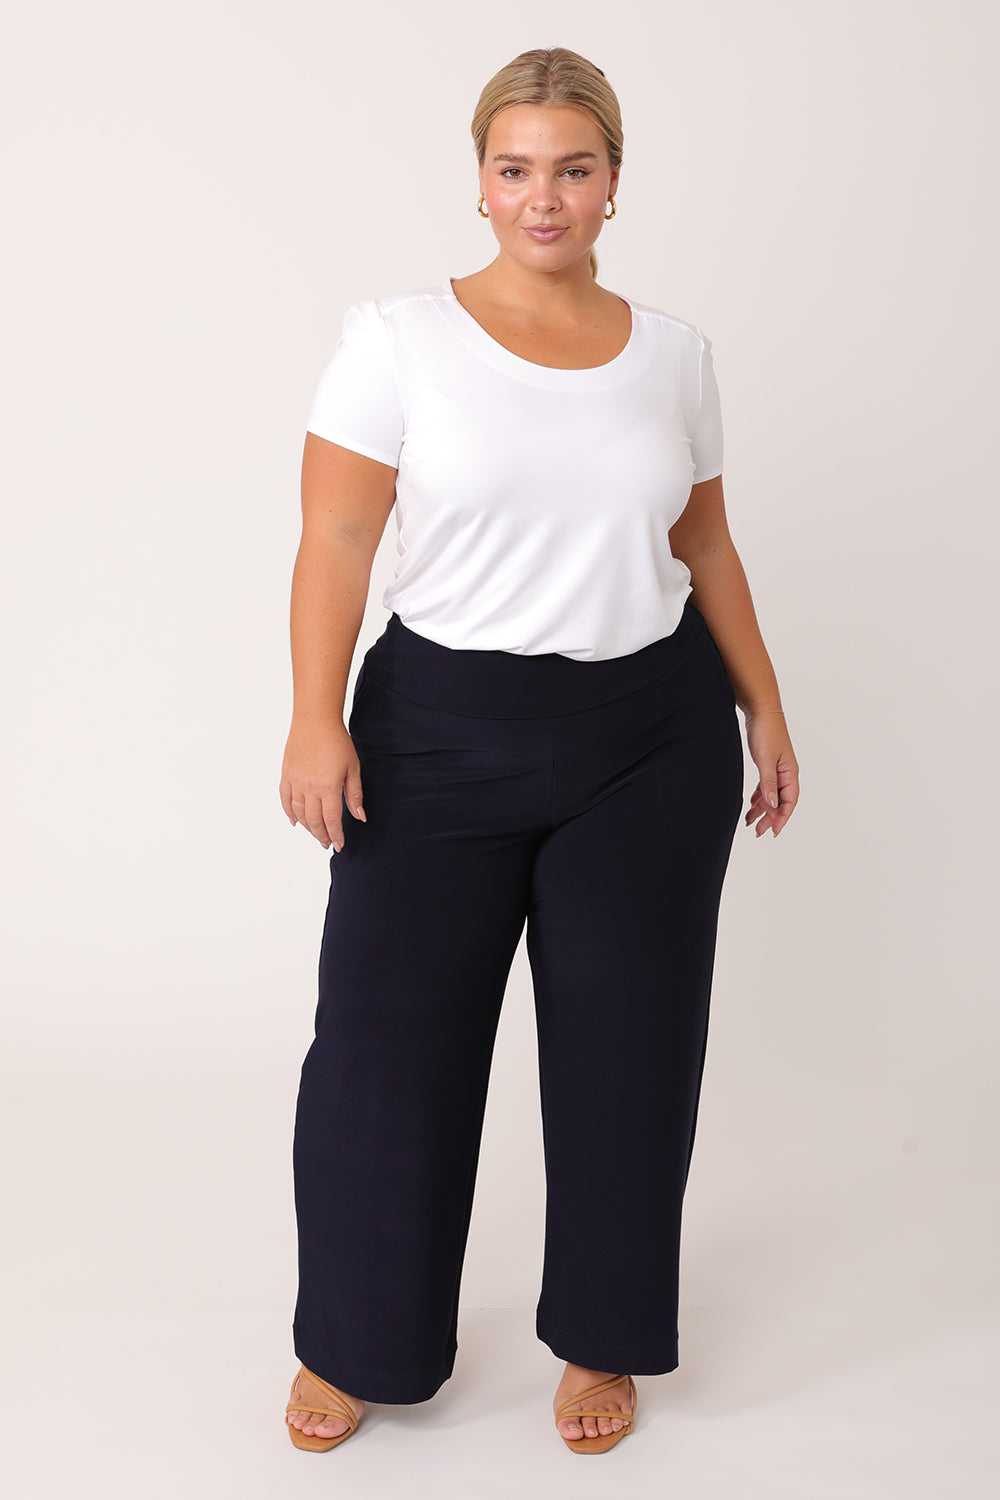 A petite woman with curve wears a round neck, short sleeve white bamboo jersey top with straight leg, navy blue petite length pants.Great as a comfortable work top, this plus size top is a classic top with tailored details to elevate your workwear capsule wardrobe.